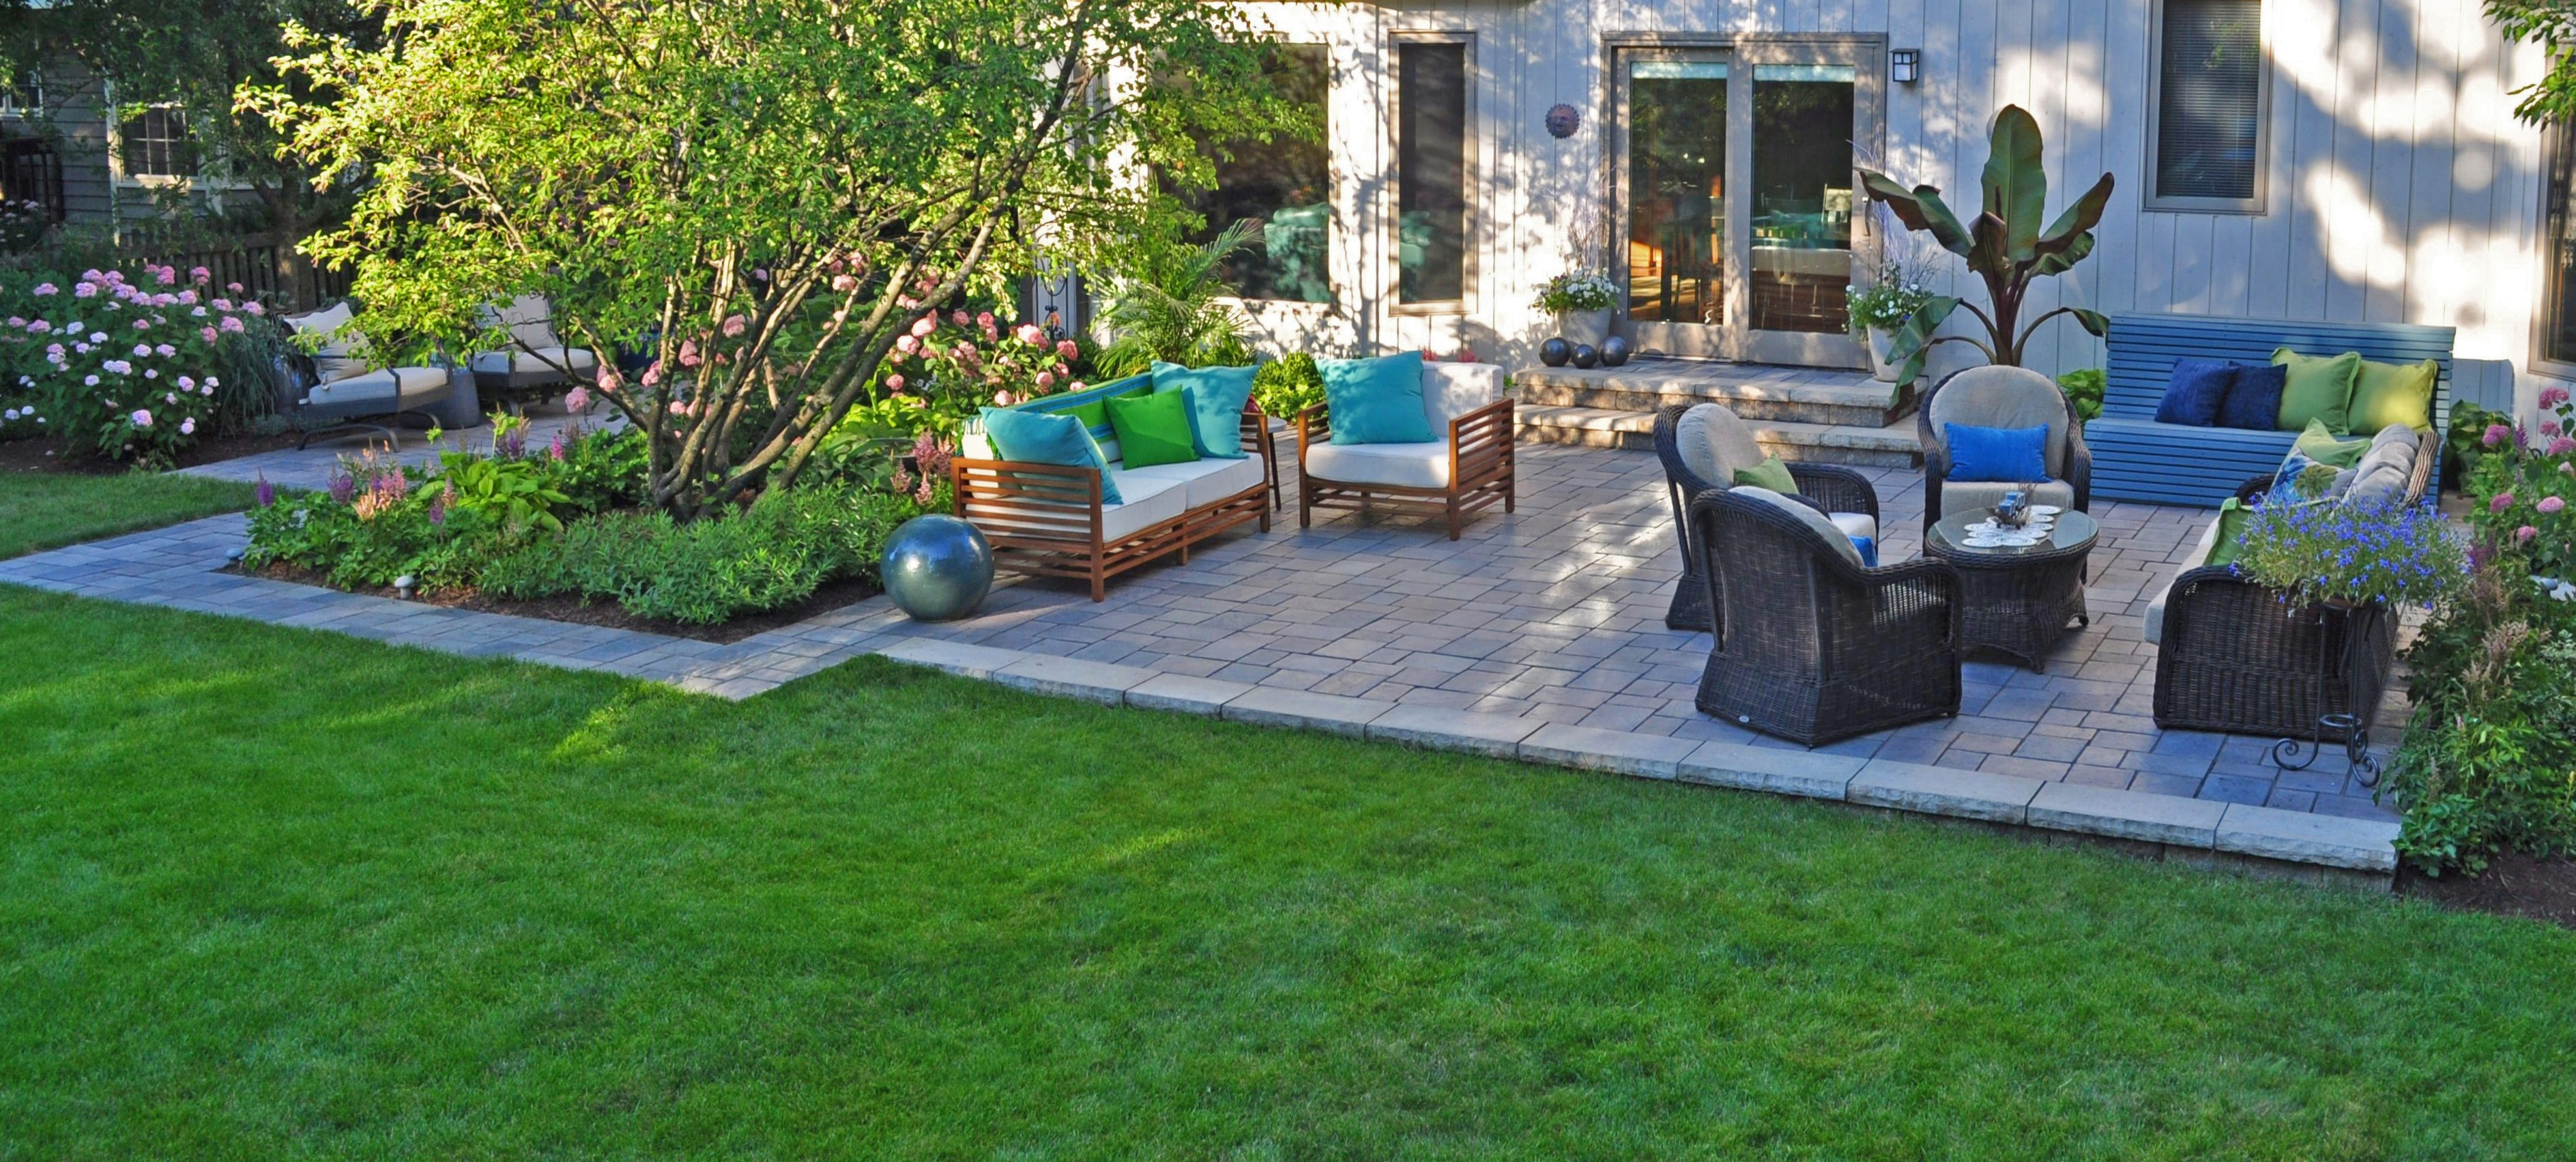 Concrete Pavers And Natural Stone For Your Patio In in dimensions 3775 X 1703